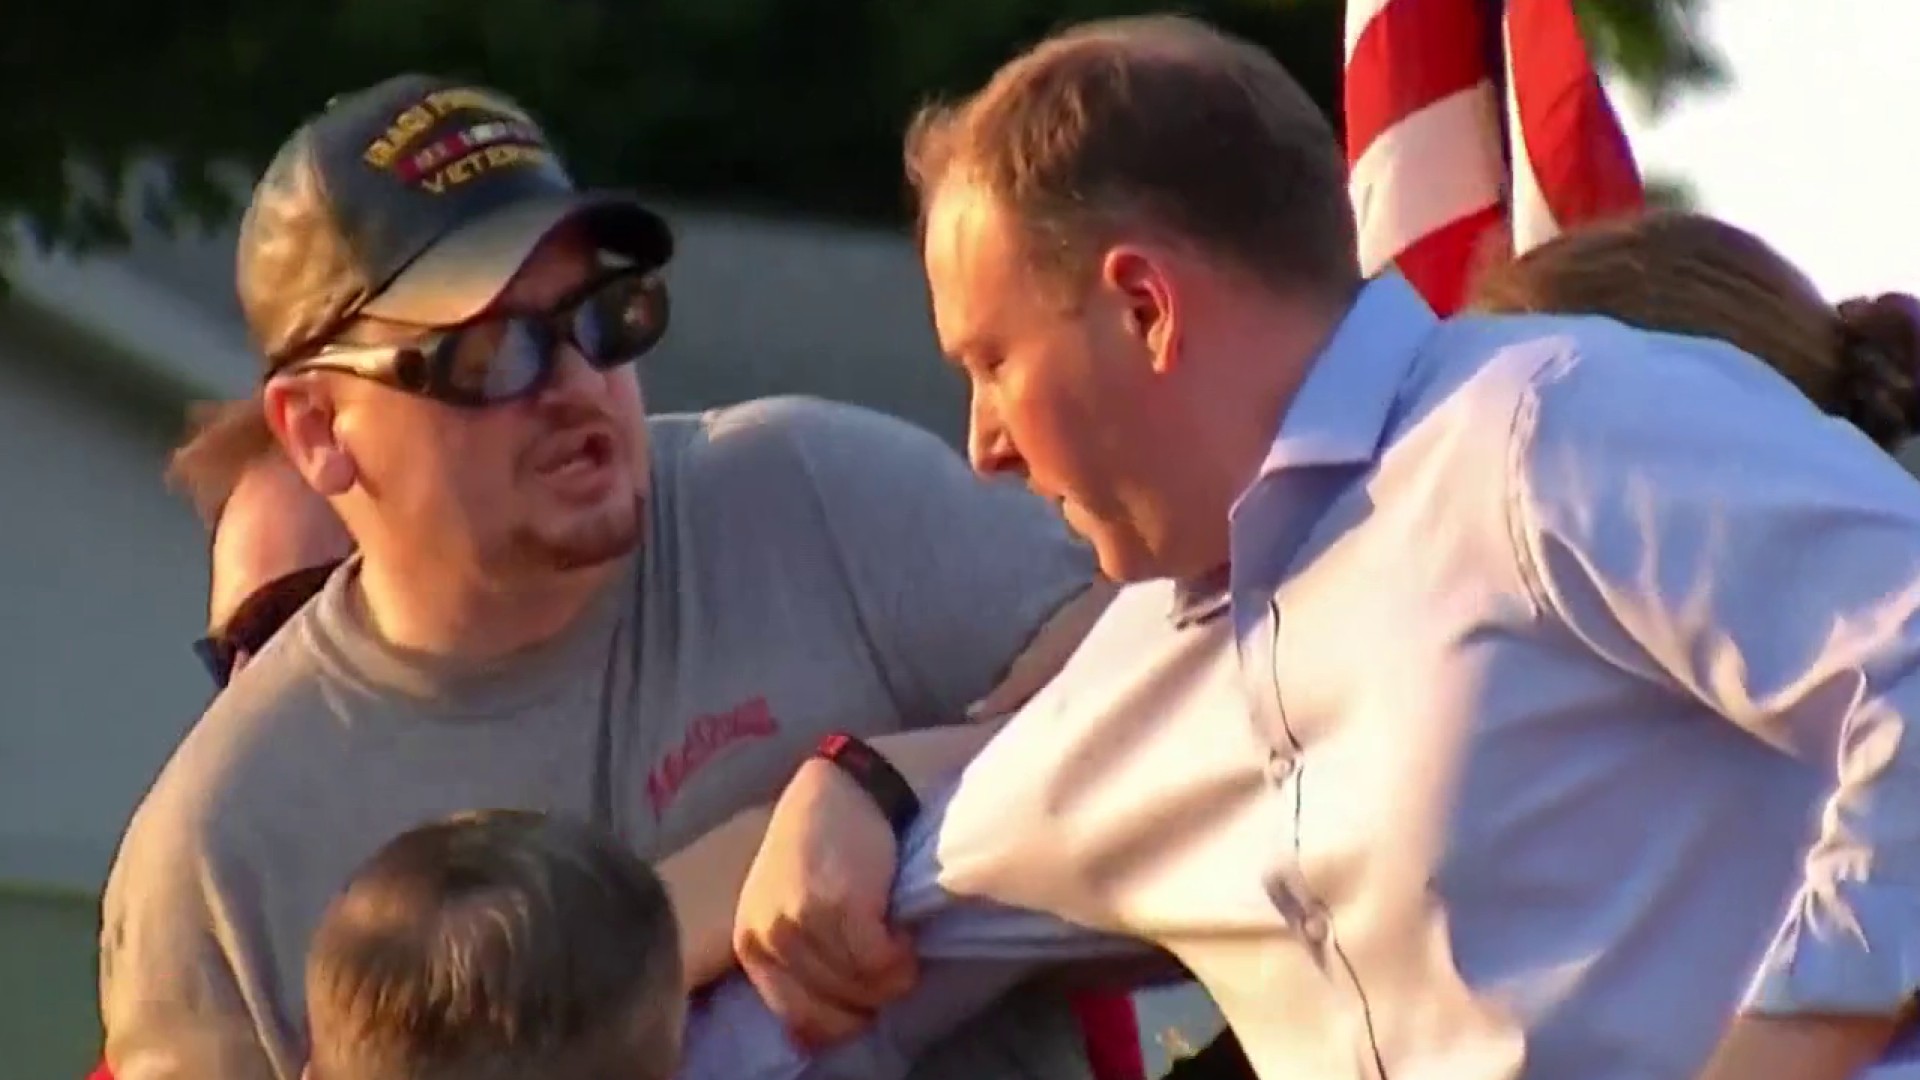 Rep. Lee Zeldin attacked at New York campaign event